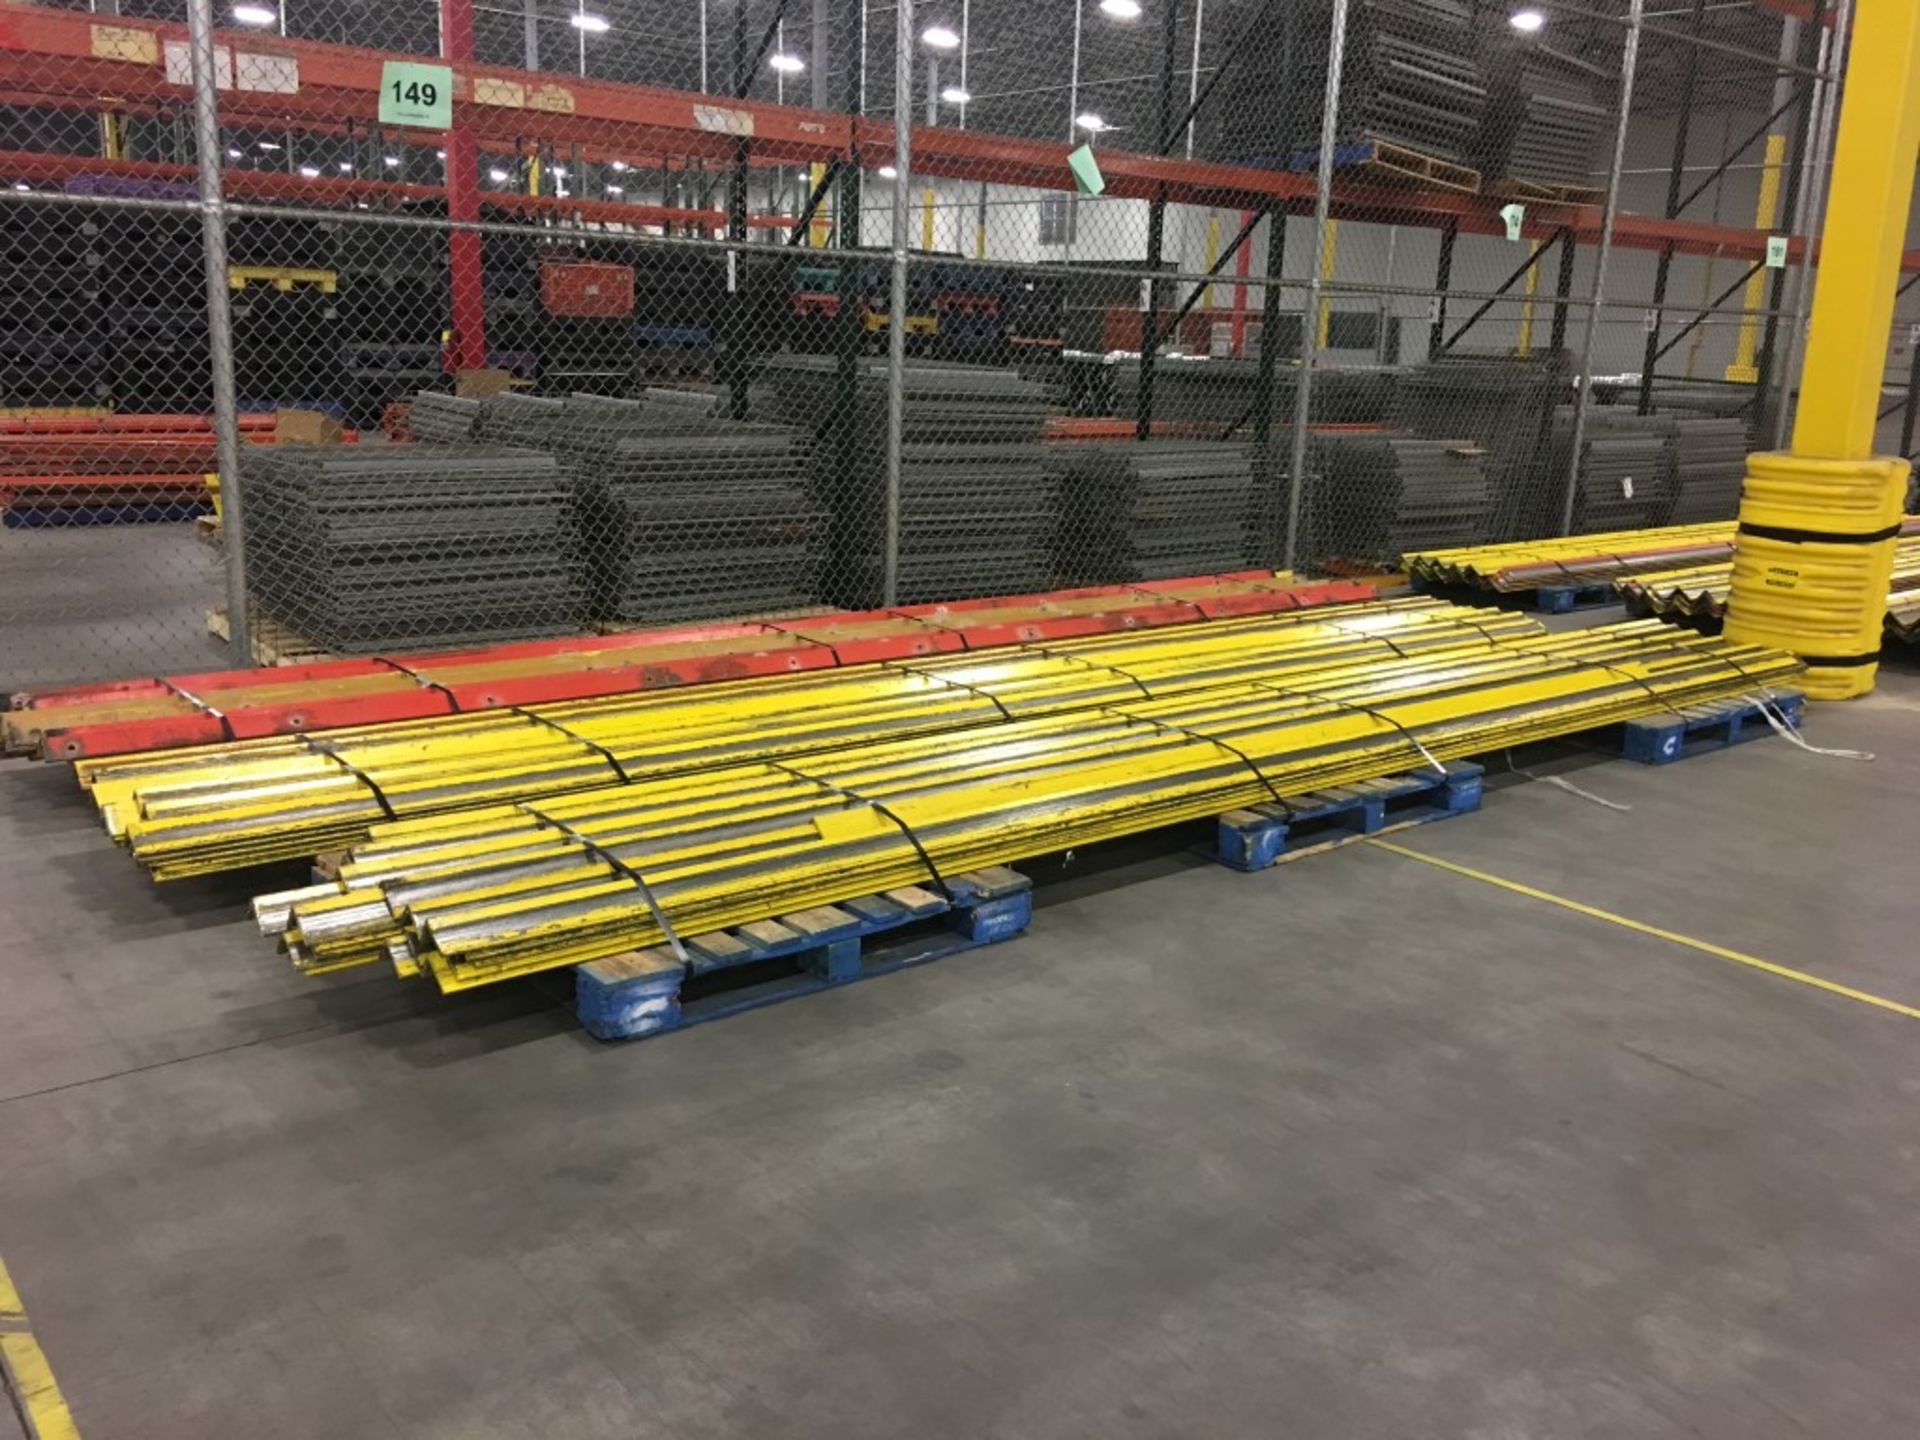 500FT OF FLOOR ANGLE GUIDE RAILS 3"" X 4""